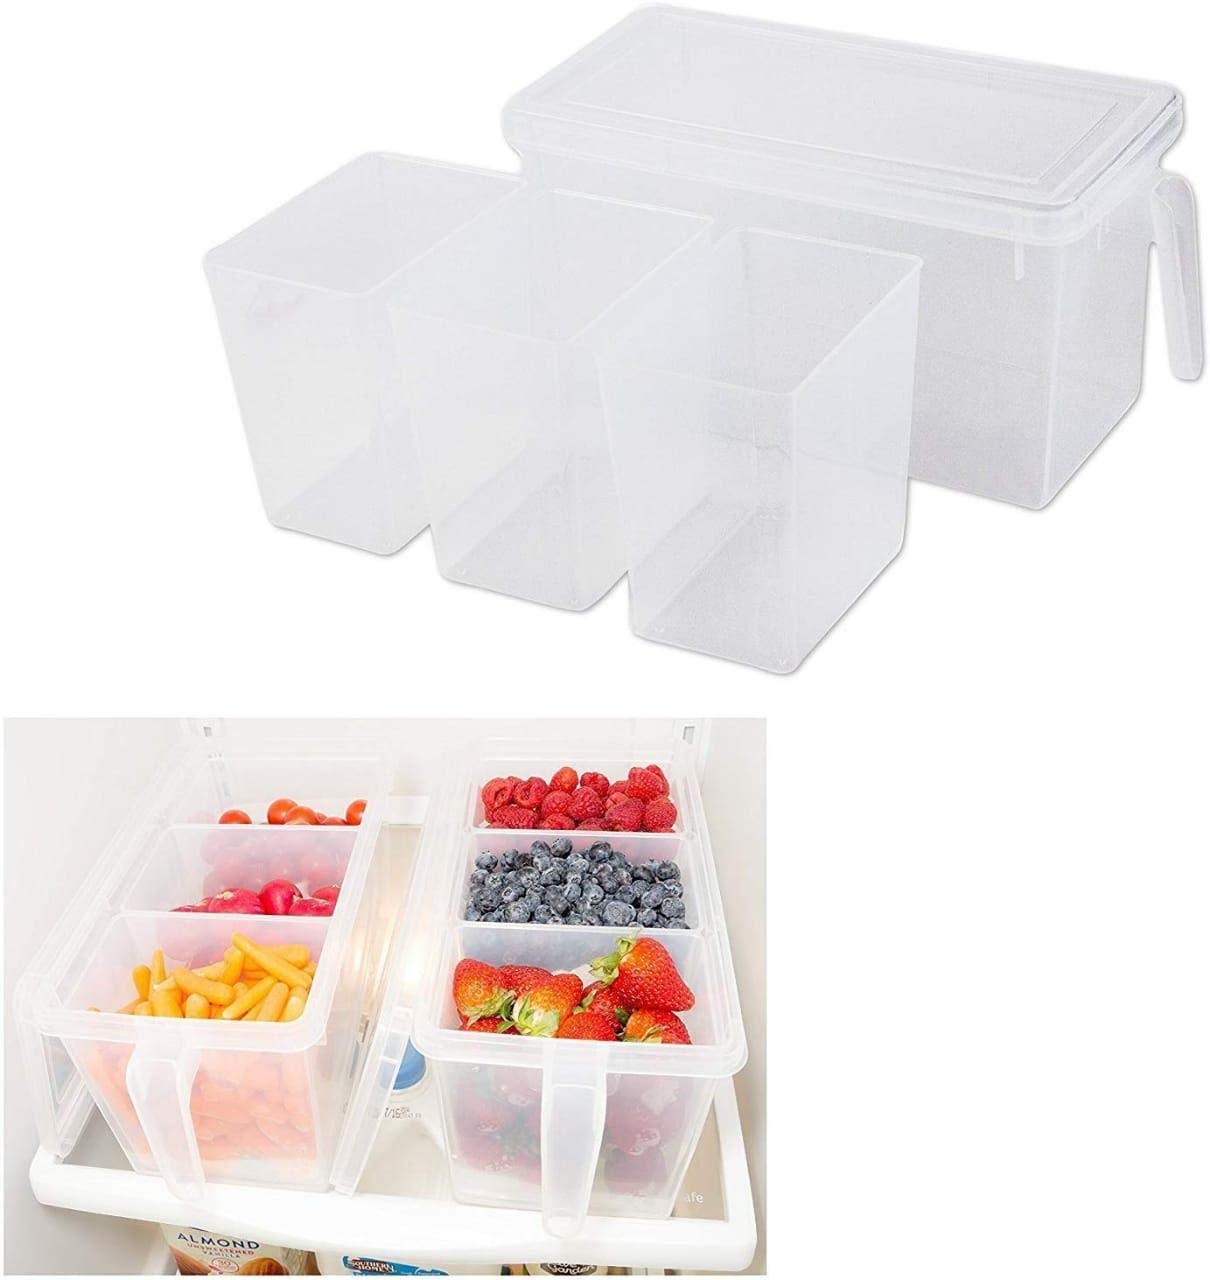 Machak Fridge Box Square Container With Handle Food Storage Organizer Boxes - Clear with Lid, Handle and 3 Smaller Bins (Set of 2)